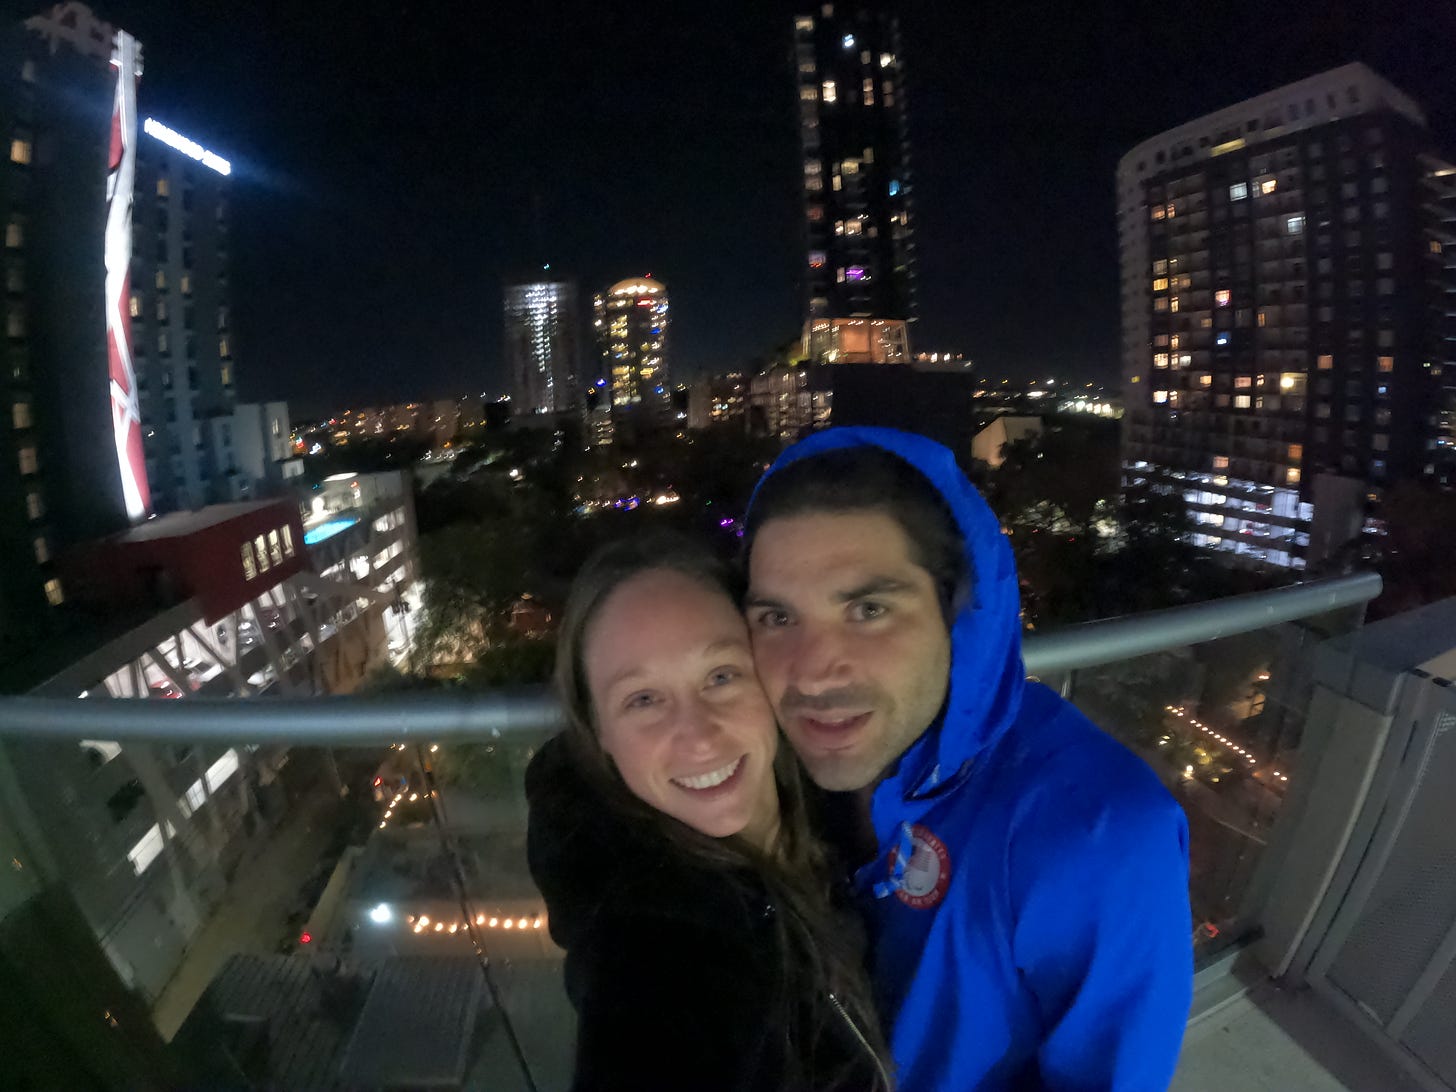 Anthony and kelly stand on the roof top at night overlooking downtown austin